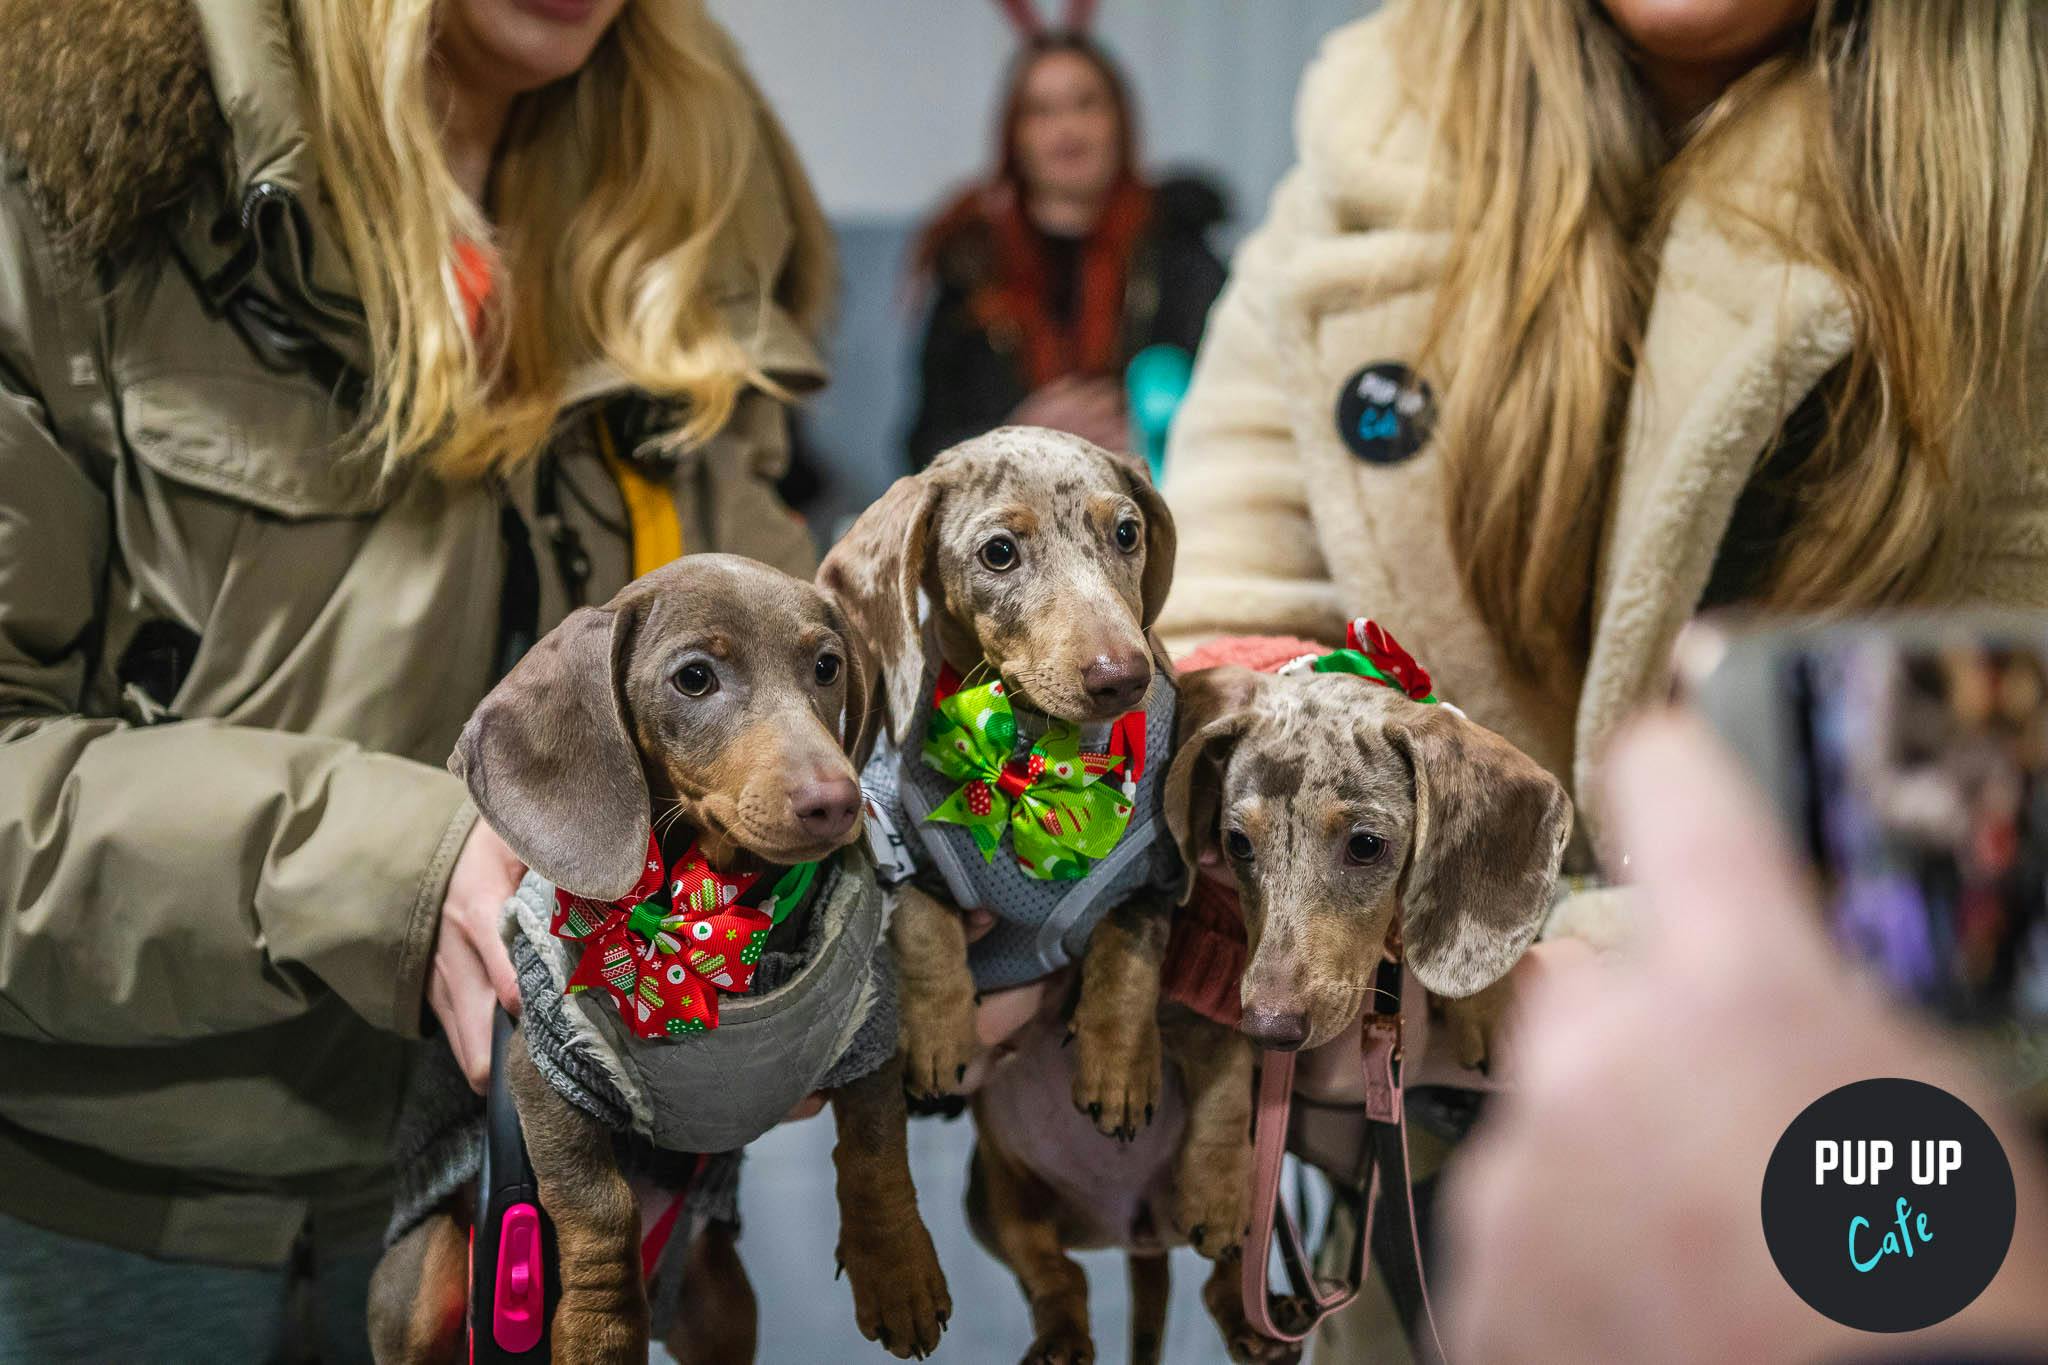 A ‘dashing dachshund’ pop-up cafe for sausage dogs is coming to Manchester this Christmas